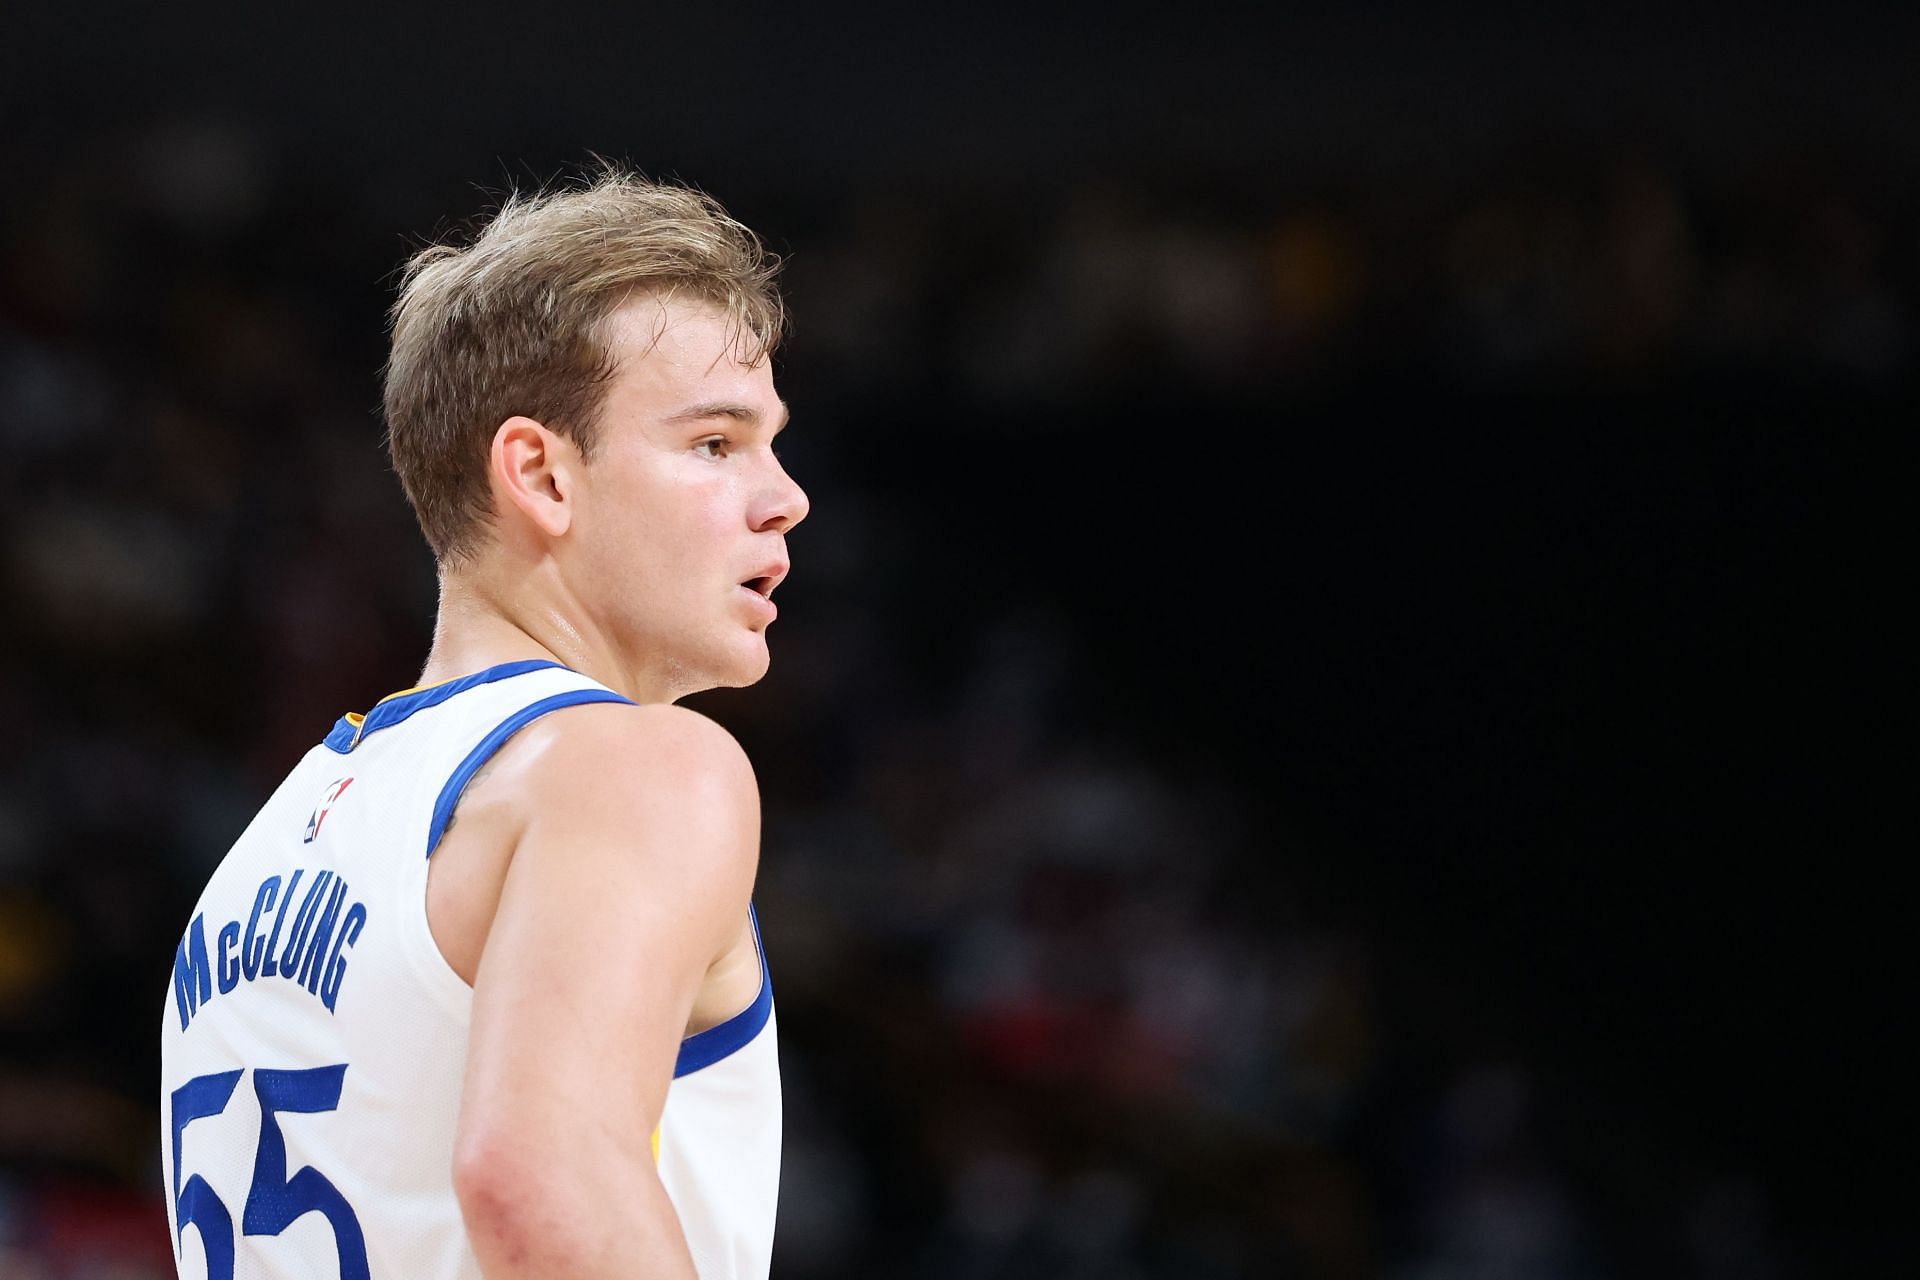 McClung playing for the Golden State Warriors